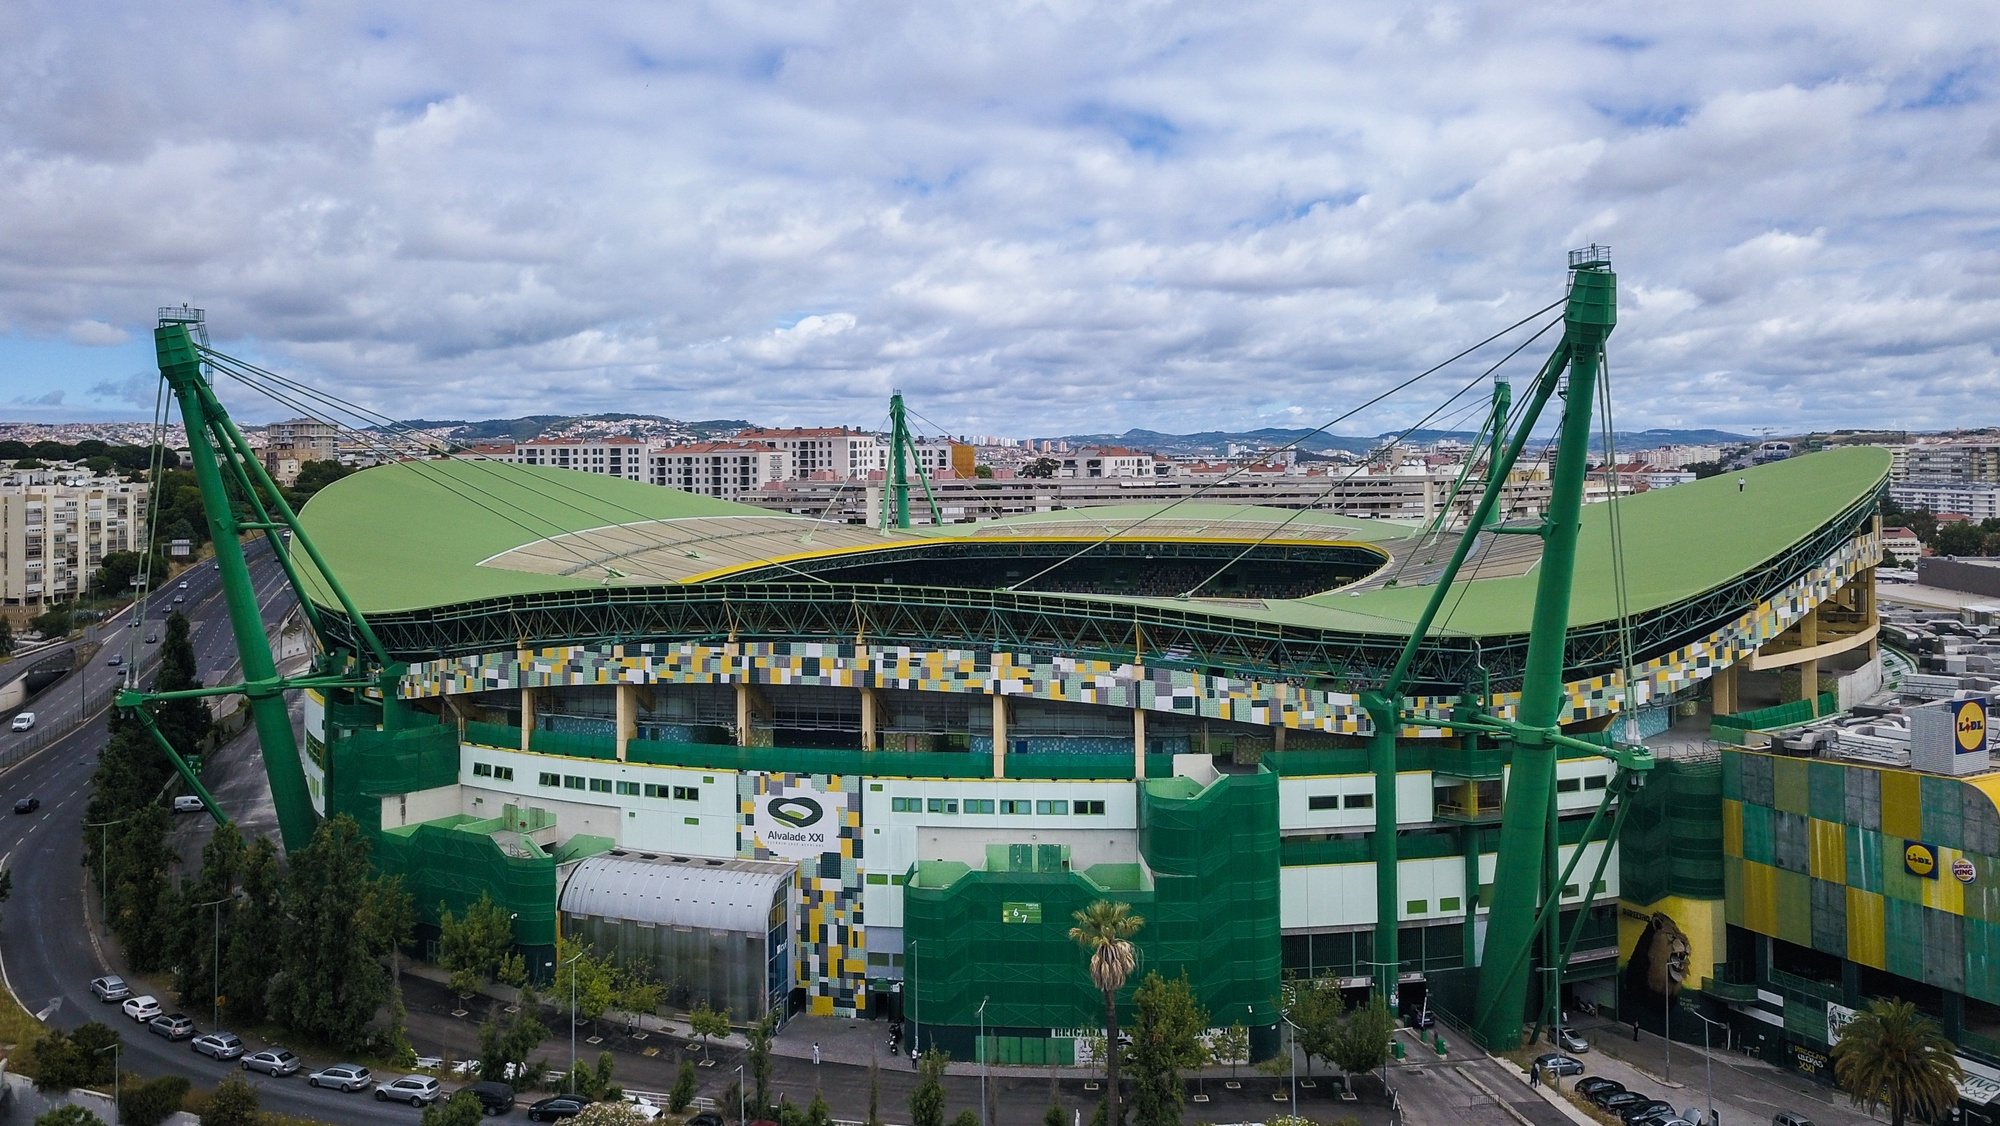 General view of Jose Alvalade Stadium where will be played the final phase of the UEFA Champions League 2020, in Lisbon, Portugal, 17 June 2020. The 2019/20 edition of UEFA Champions League, which was suspended in March due to the covid-19 pandemic, will be resumed with the remaining four Round of 16 matches, followed by the first-ever outcome on neutral fields, at Luz and Jose Alvalade stadiums in Lisbon. MARIO CRUZ/LUSA